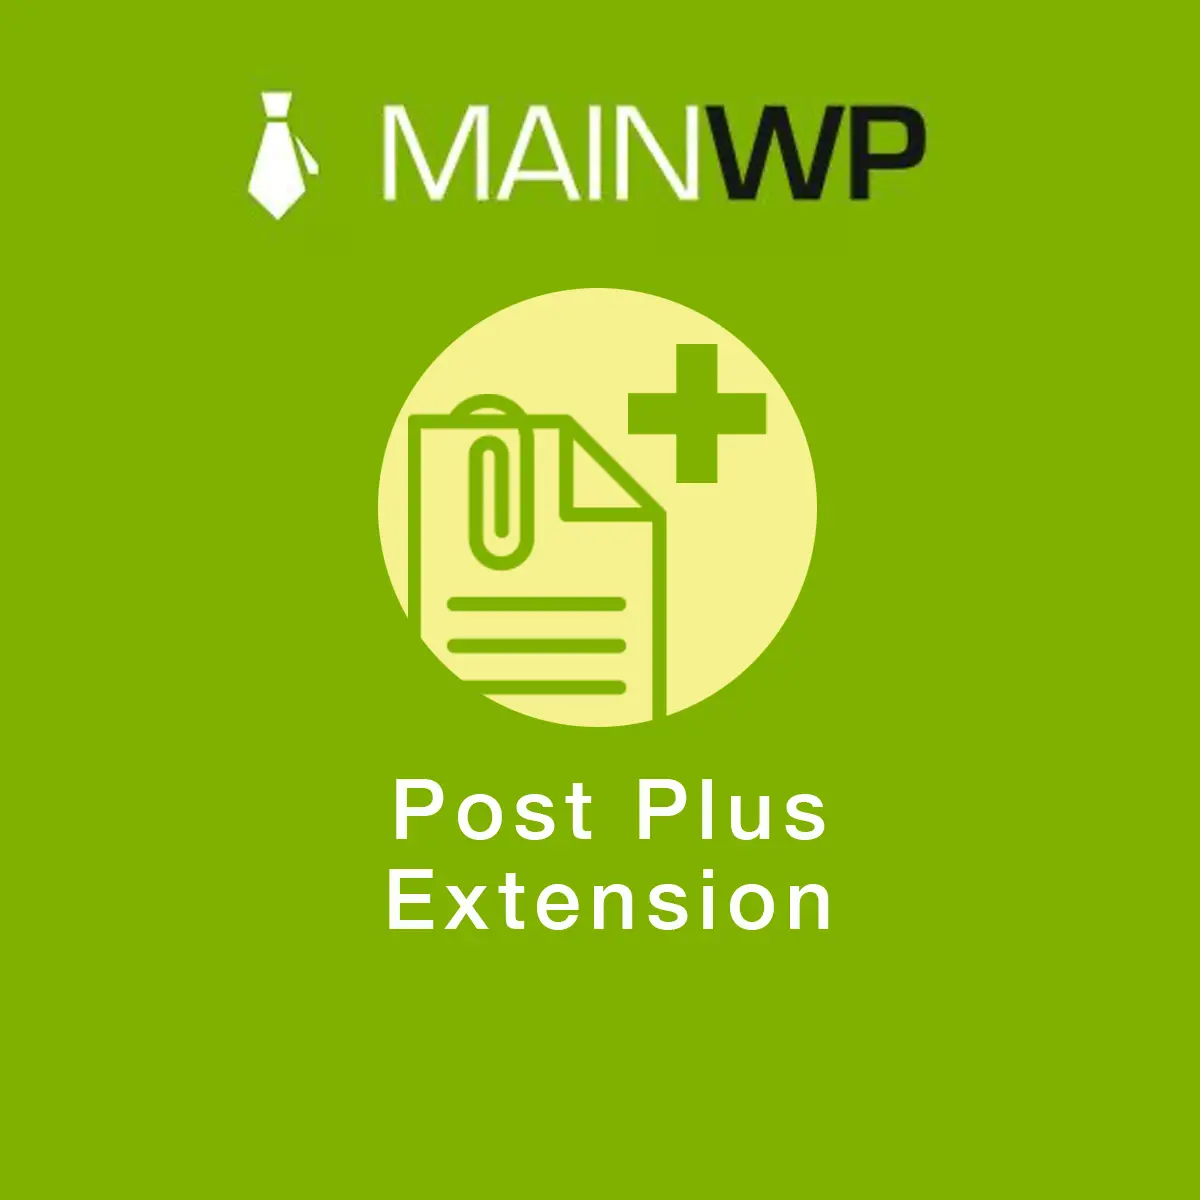 Download MainWP Post Plus Extension